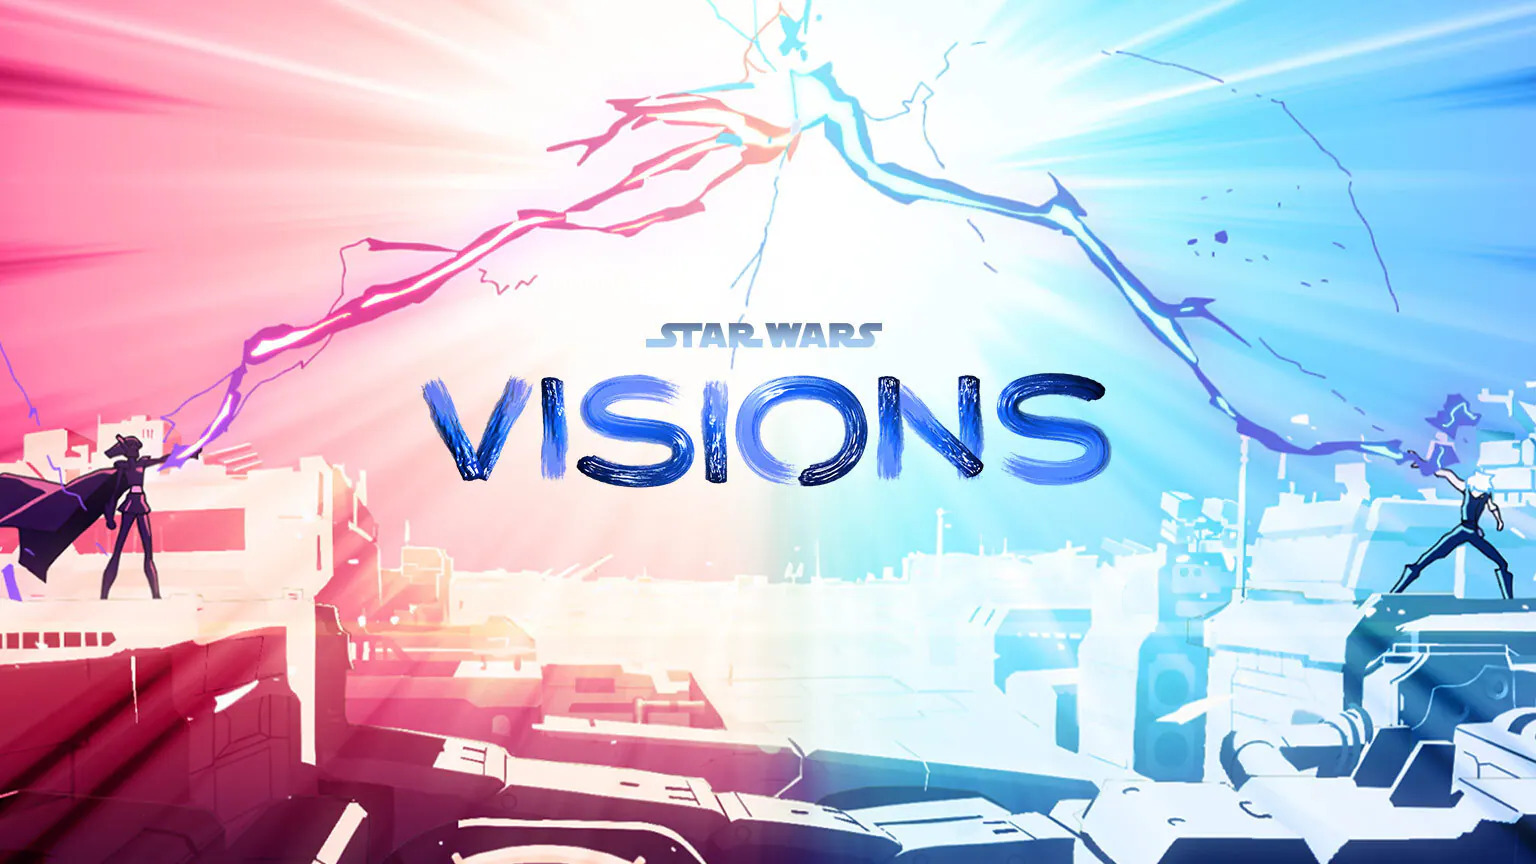 Star Wars: Visions Volume 2, trailer and poster from the Star Wars Celebration: animation studios announced